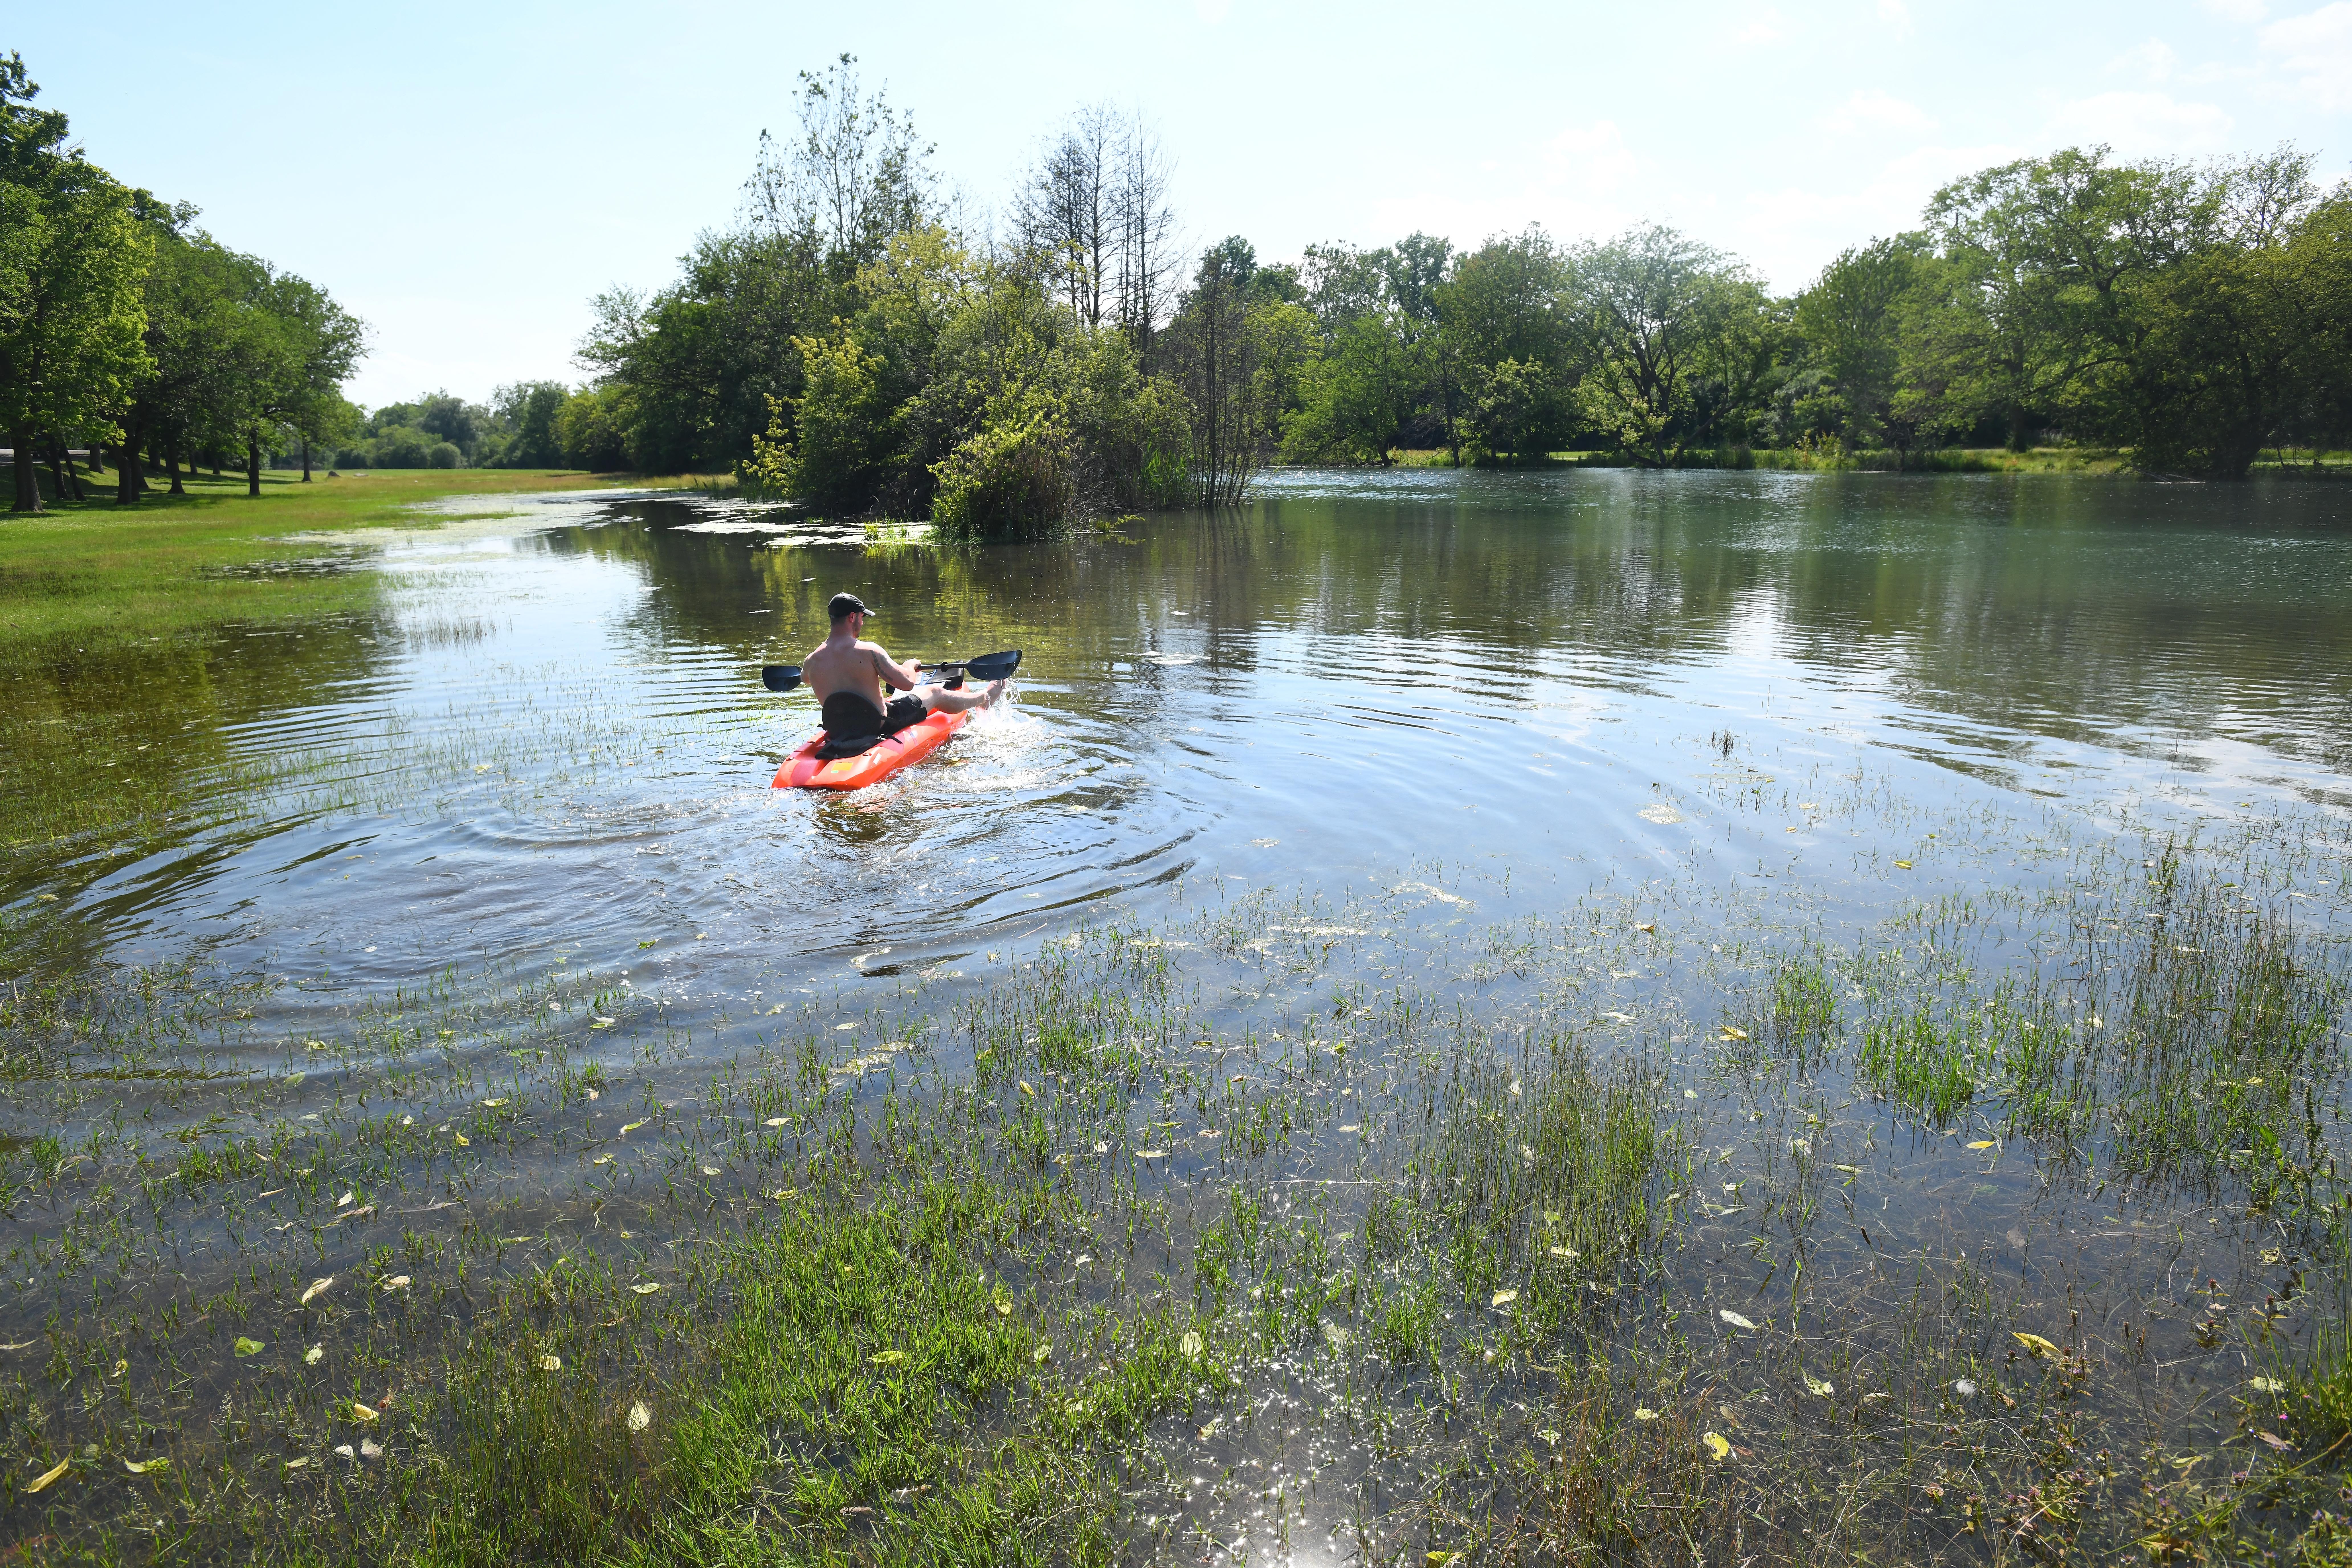 Brian Adam of Romulus paddles across what is normally a field near the banks of the Trenton Channel in Elizabeth Park in Trenton, Michigan on July 1, 2019.